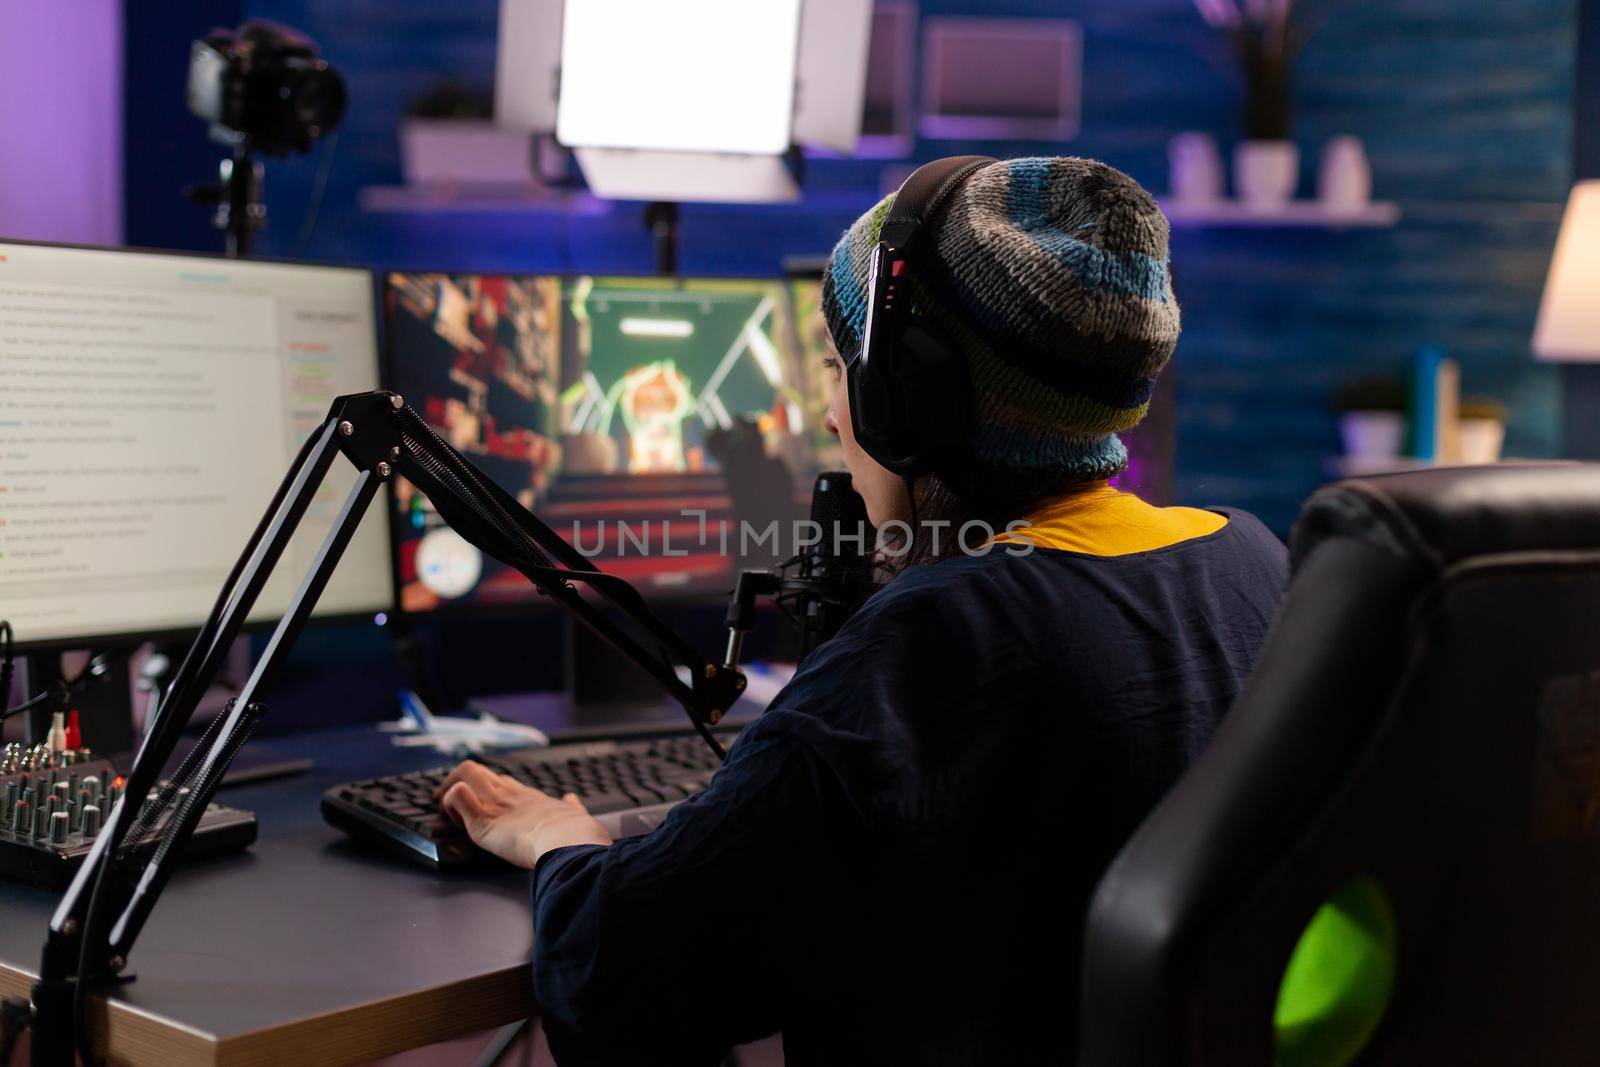 Professional streamer playing shooter games wearing headphones and talking into microphone via streaming chat. Gamer making online videogames with new graphics on powerful computer